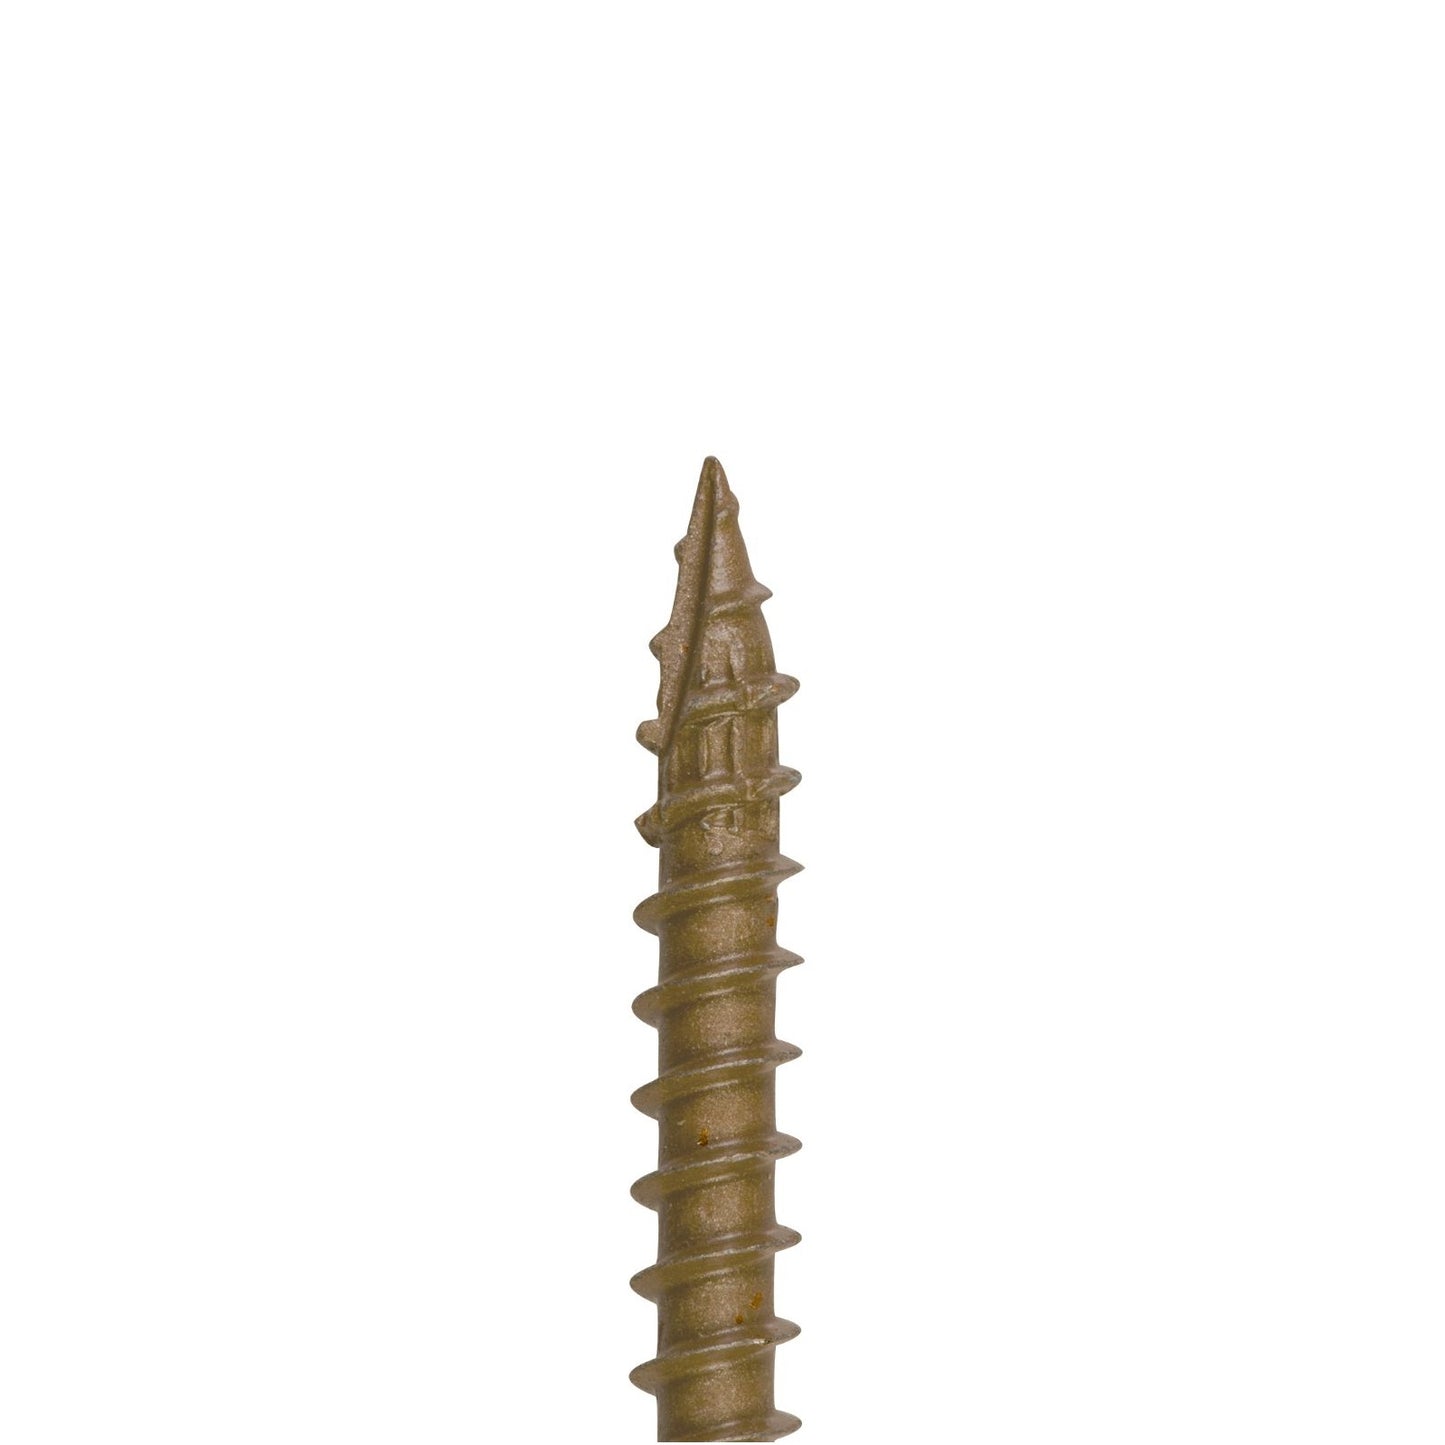 160 inch x 3 inch StrongTie SDWS Framing Screws Pkg 250 image 1 of 3 image 2 of 3 image 3 of 3